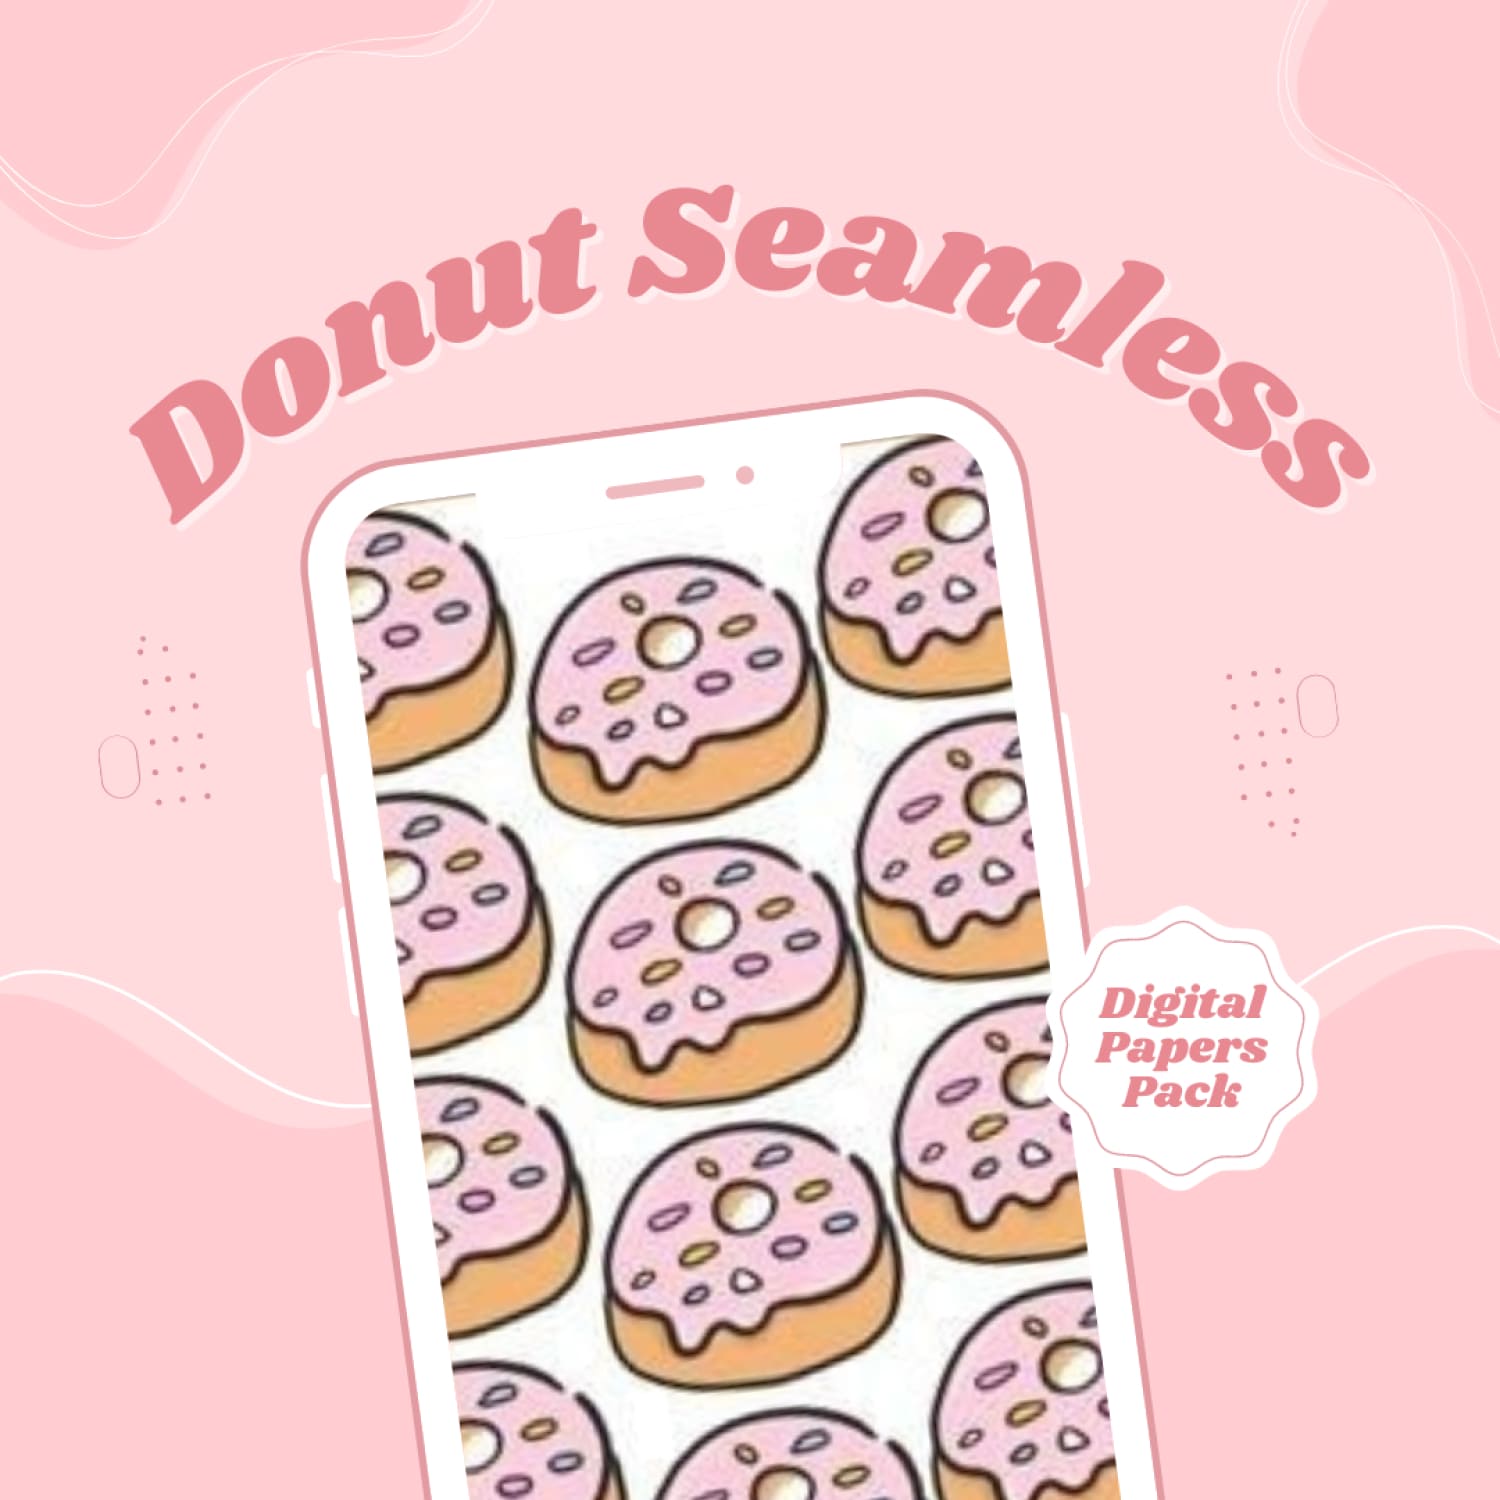 12 Donut Seamless Digital Papers Pack.